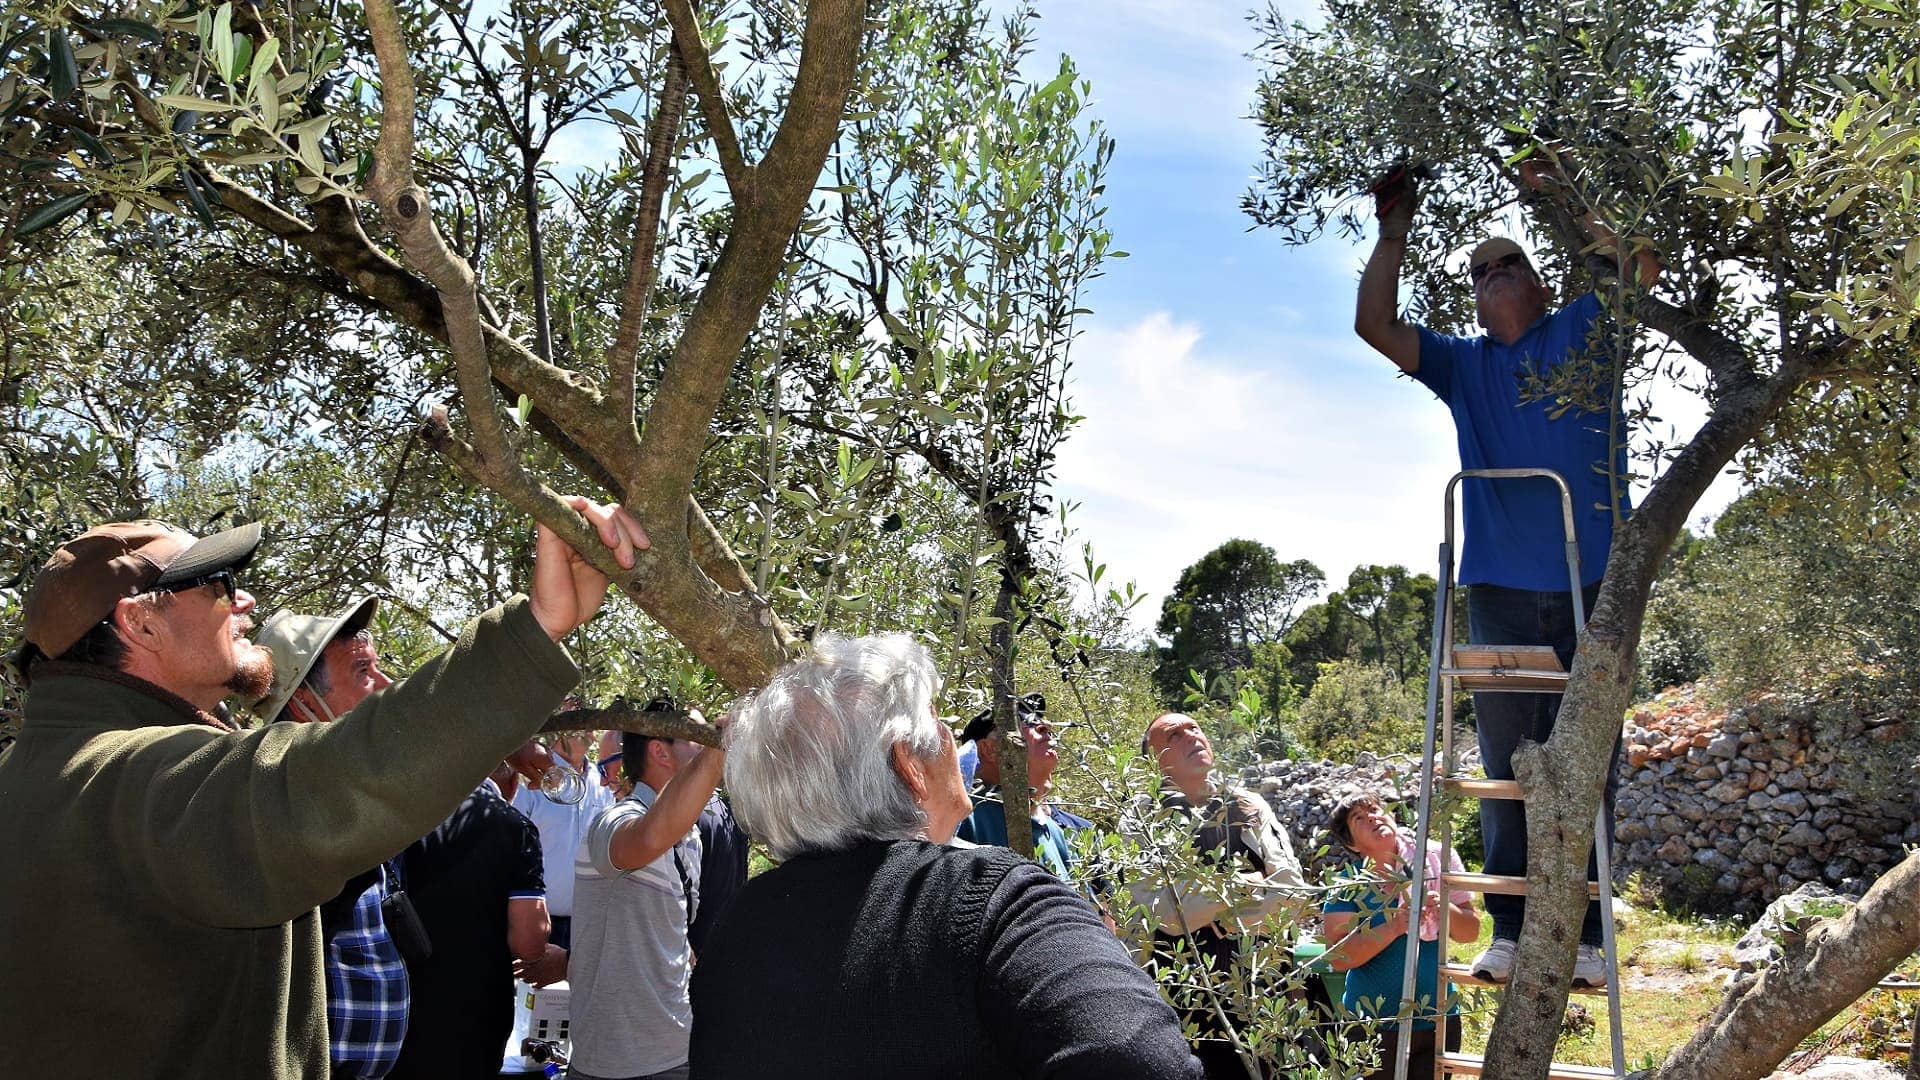 production-a-croatian-agronomists-guide-to-olive-tree-pruning-olive-oil-times